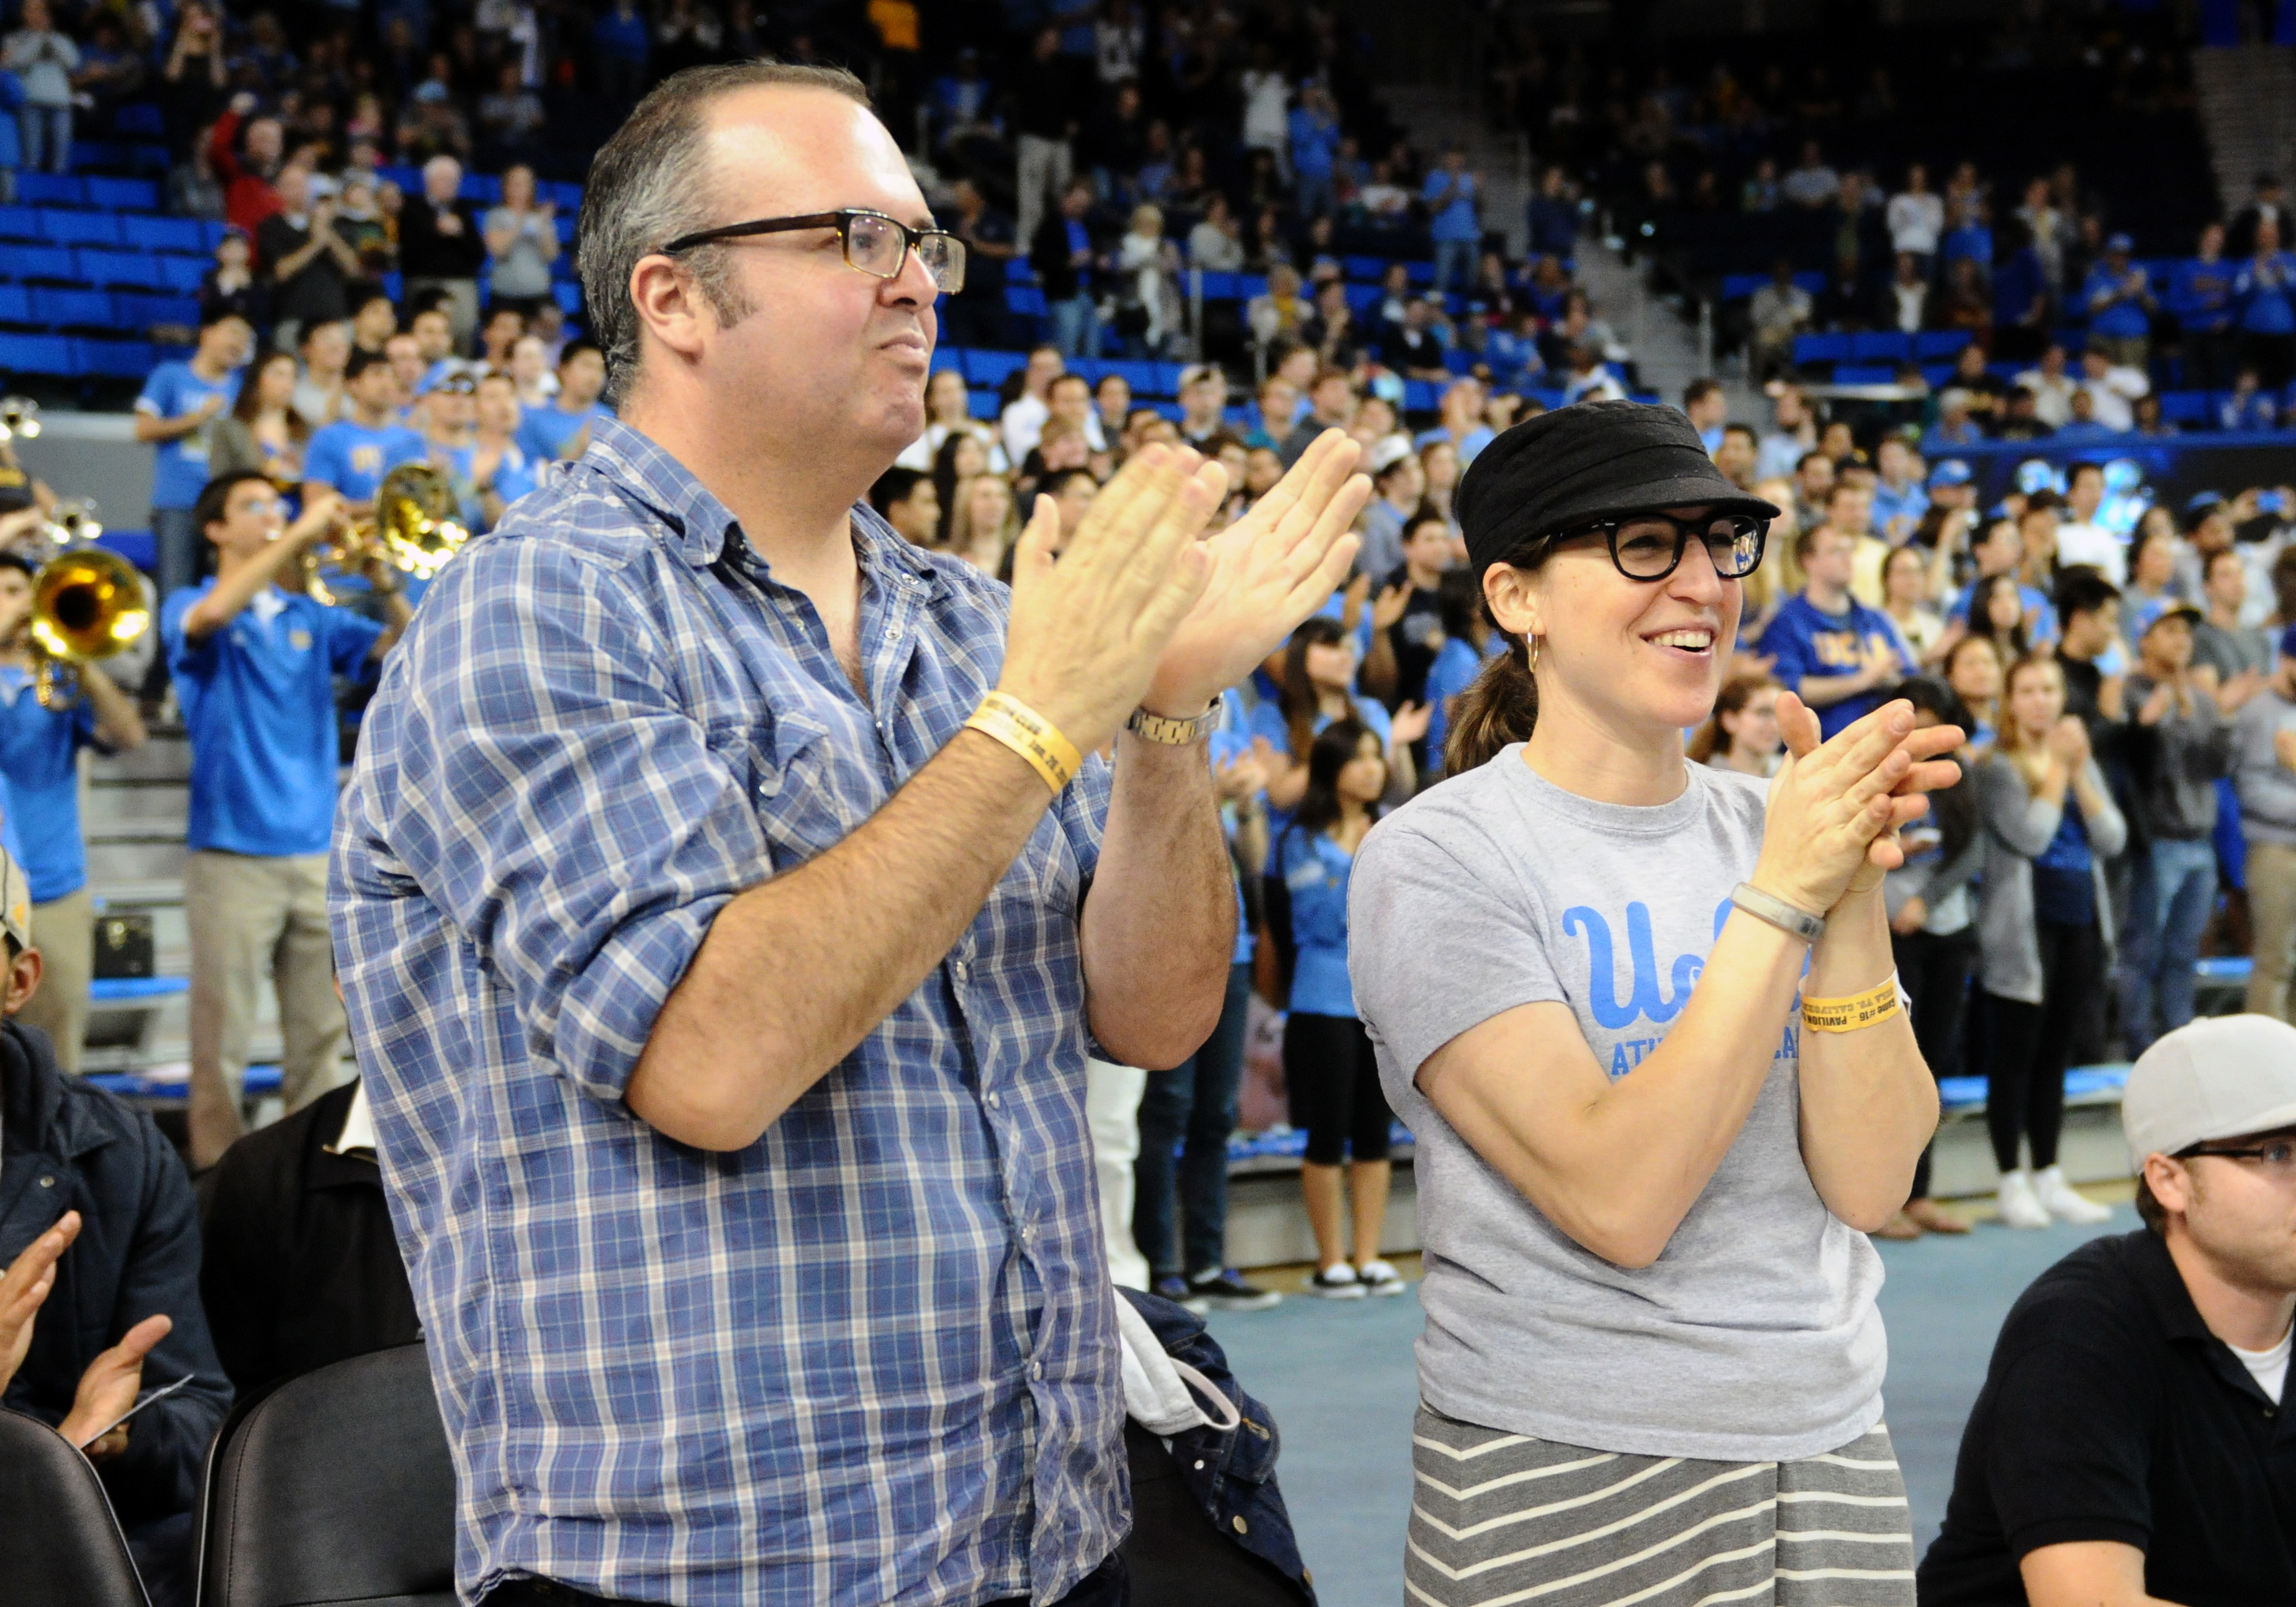 Mayim Bialik and Michael Stone attend an NCAA basketball game between the California Golden Bears and the UCLA Bruins in Los Angeles, California on January 26, 2014 | Source: Getty Images